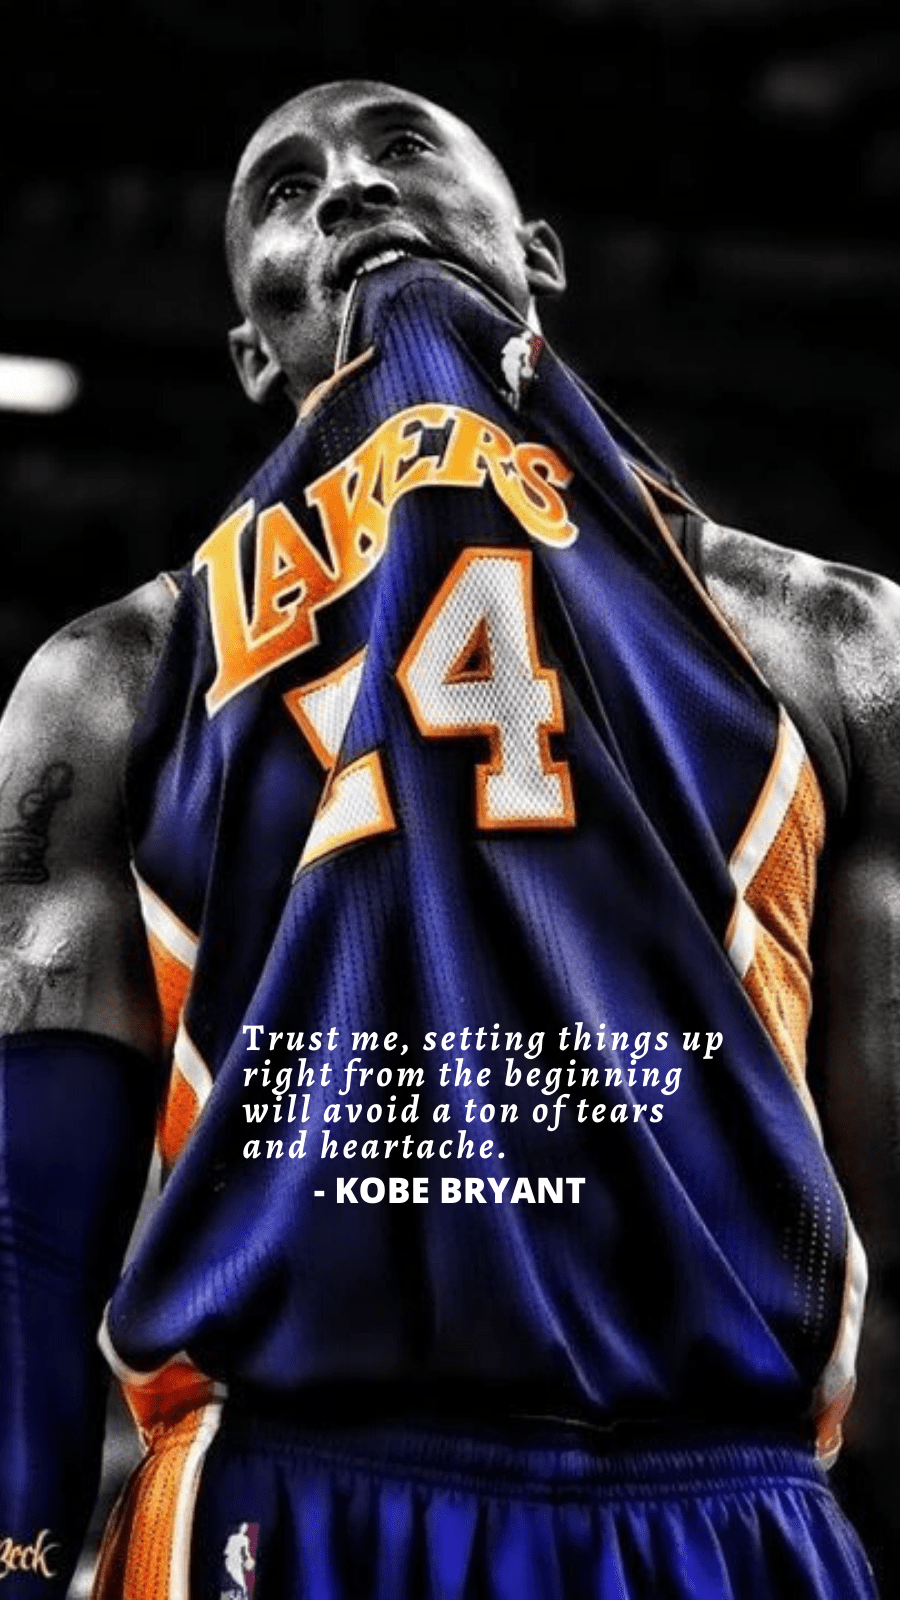 Discover 64+ mamba mentality quotes wallpaper - in.cdgdbentre